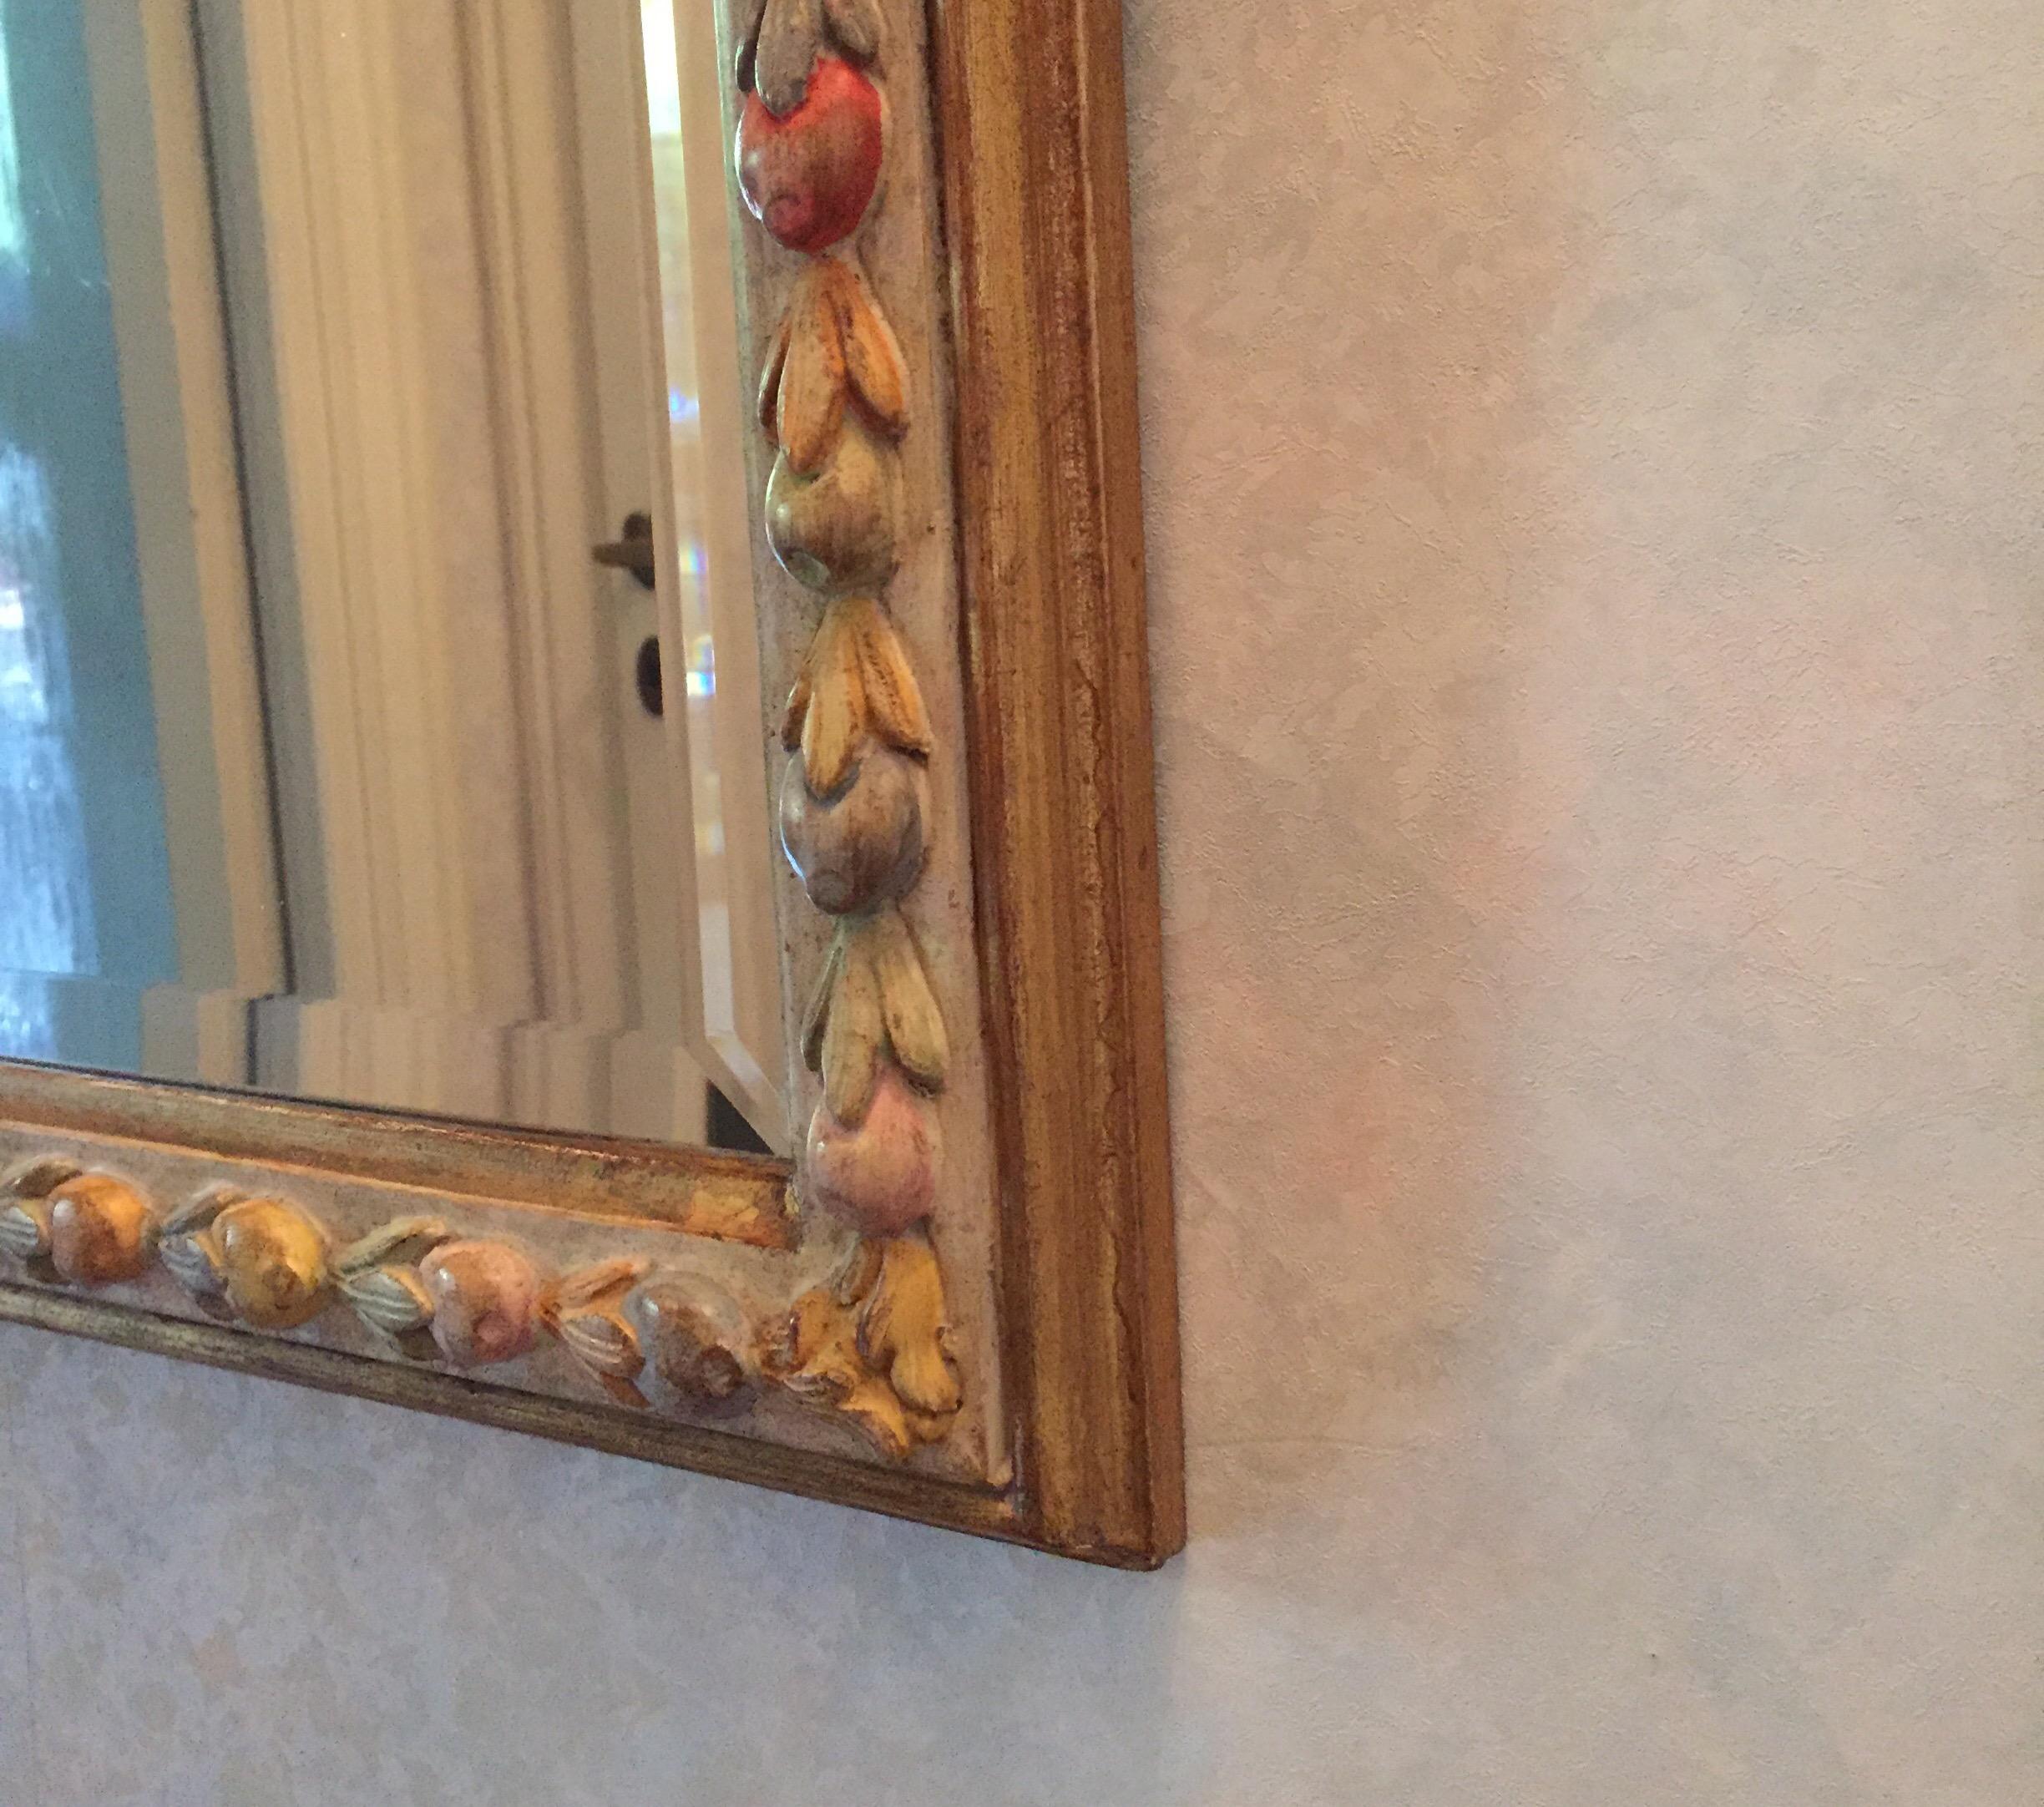 Italian mirror by Florentine manufacture Chelini with a Della Robbia style fruit carving decoration with polychrome soft color painting.
Italian manufacture dating back to, circa 1980.
In good condition, wear consistent with age and use.

It is